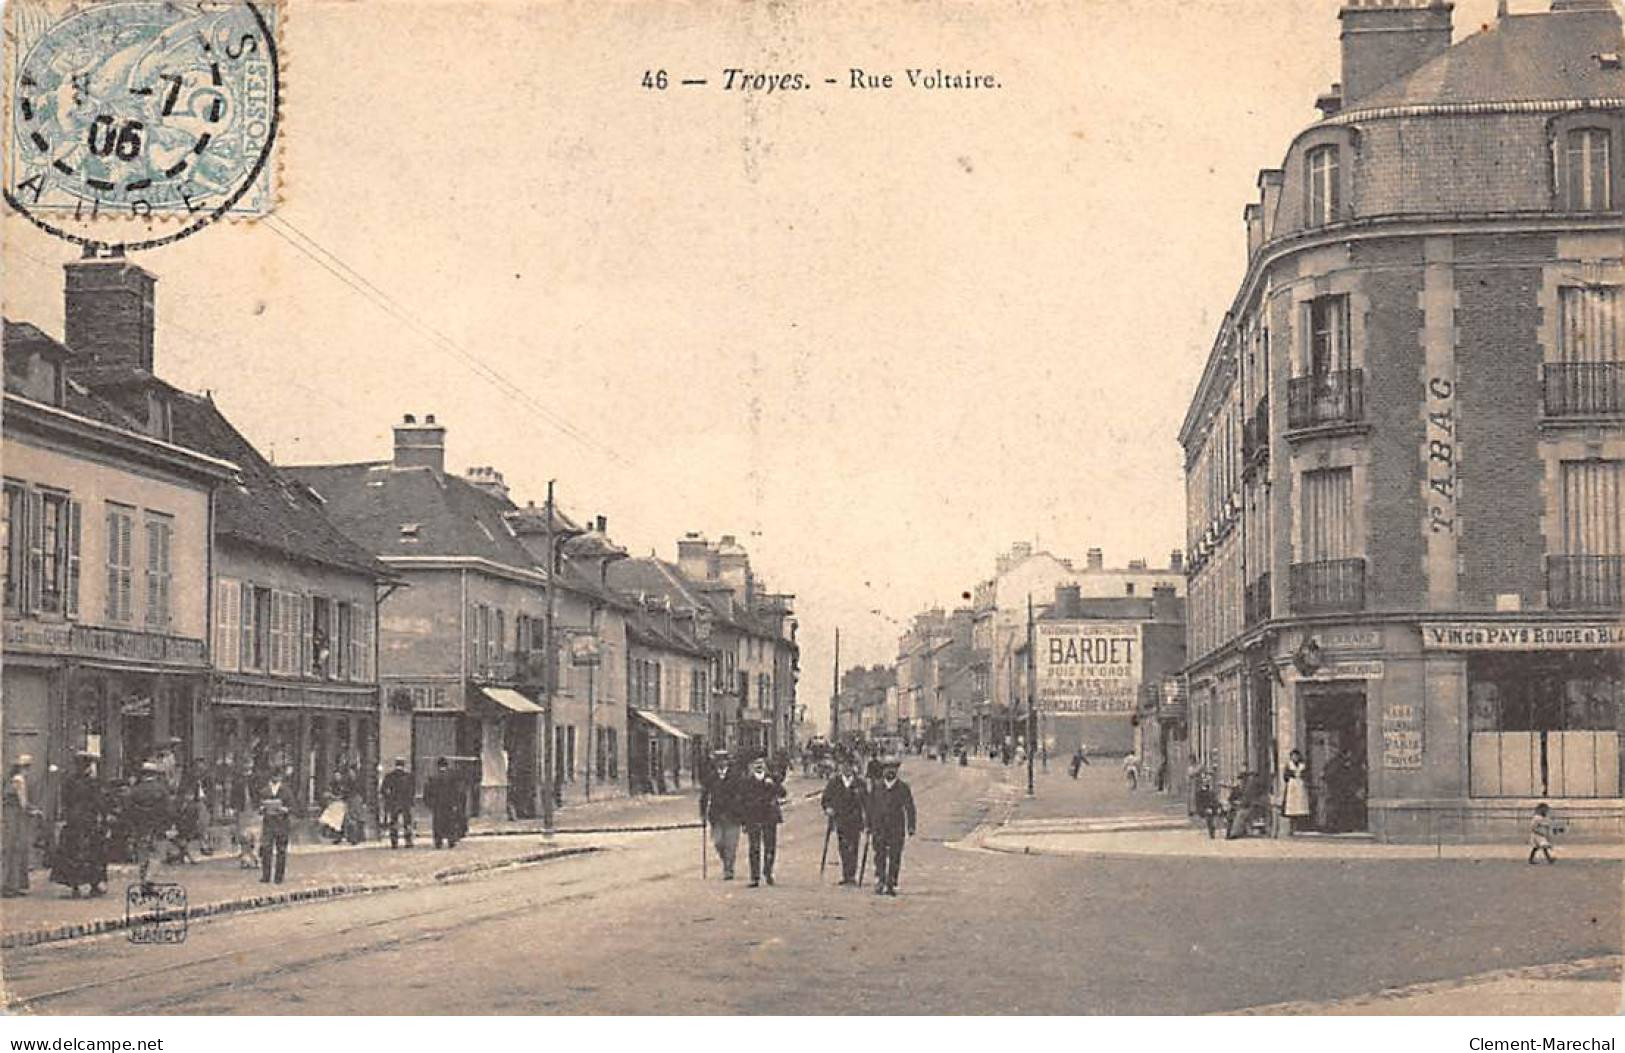 TROYES - Rue Voltaire - état - Troyes